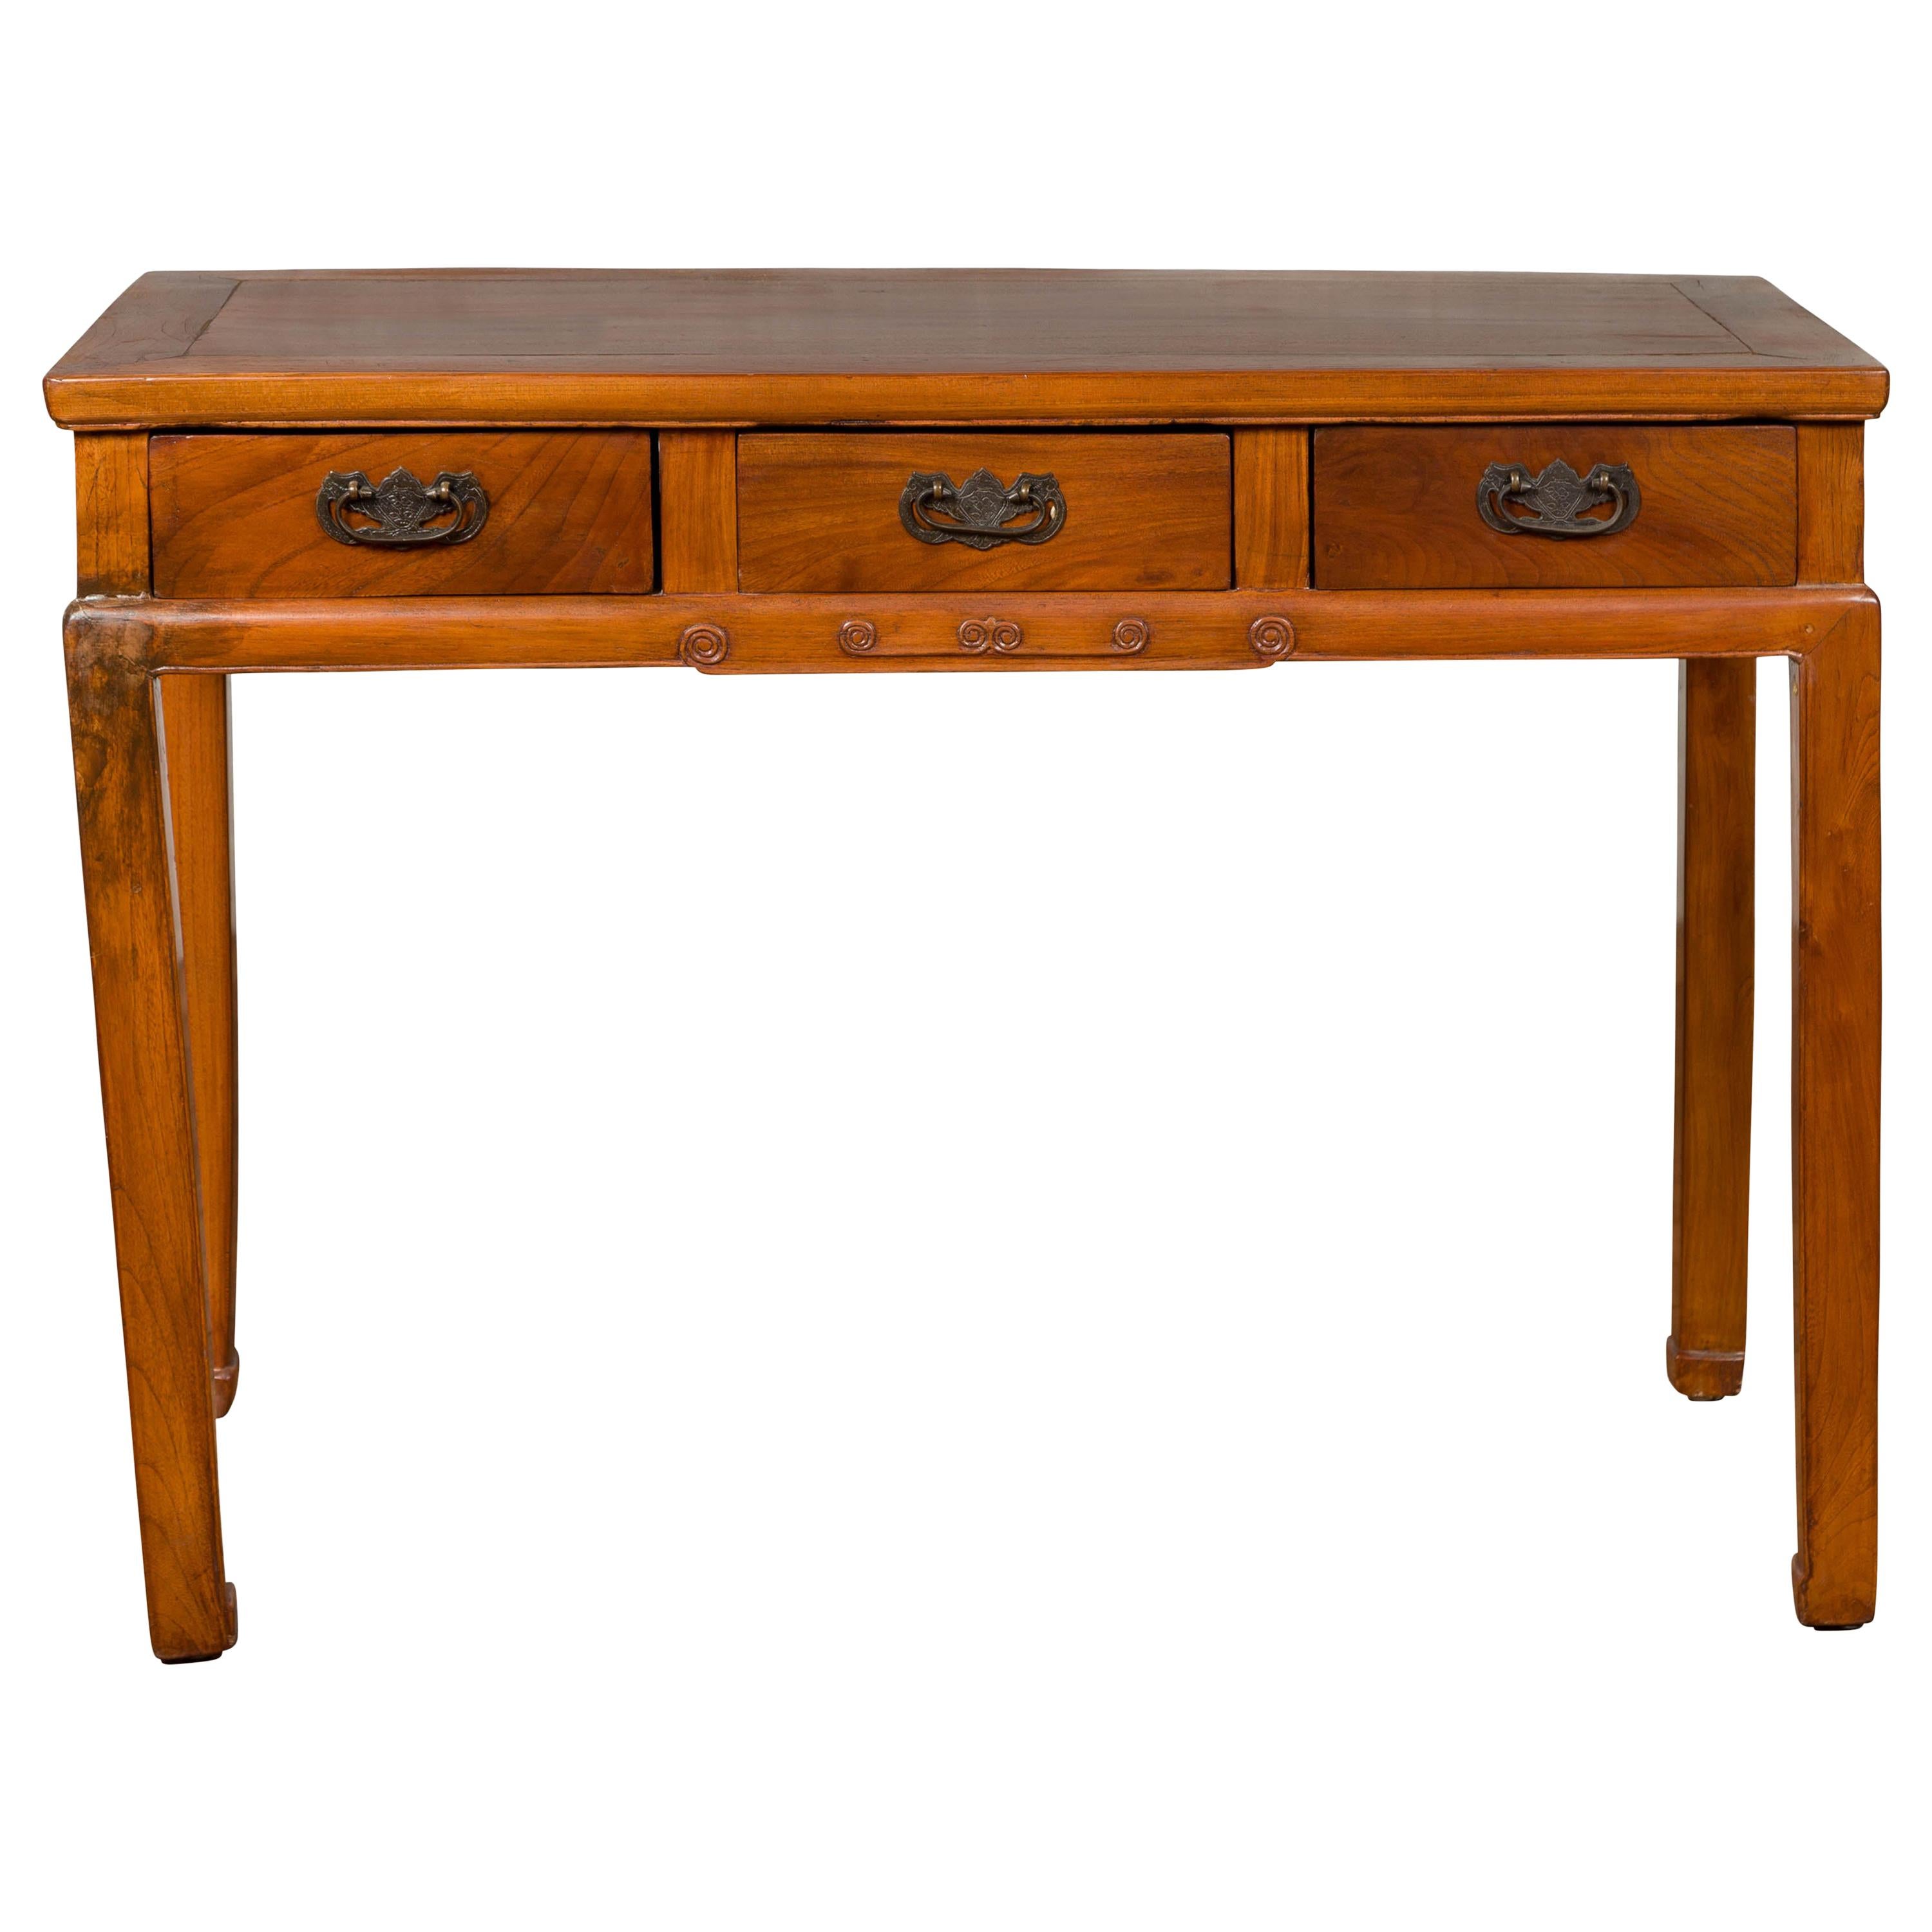 Vintage Chinese Elm Desk with Three Drawers, Iron Hardware and Swirling Motifs